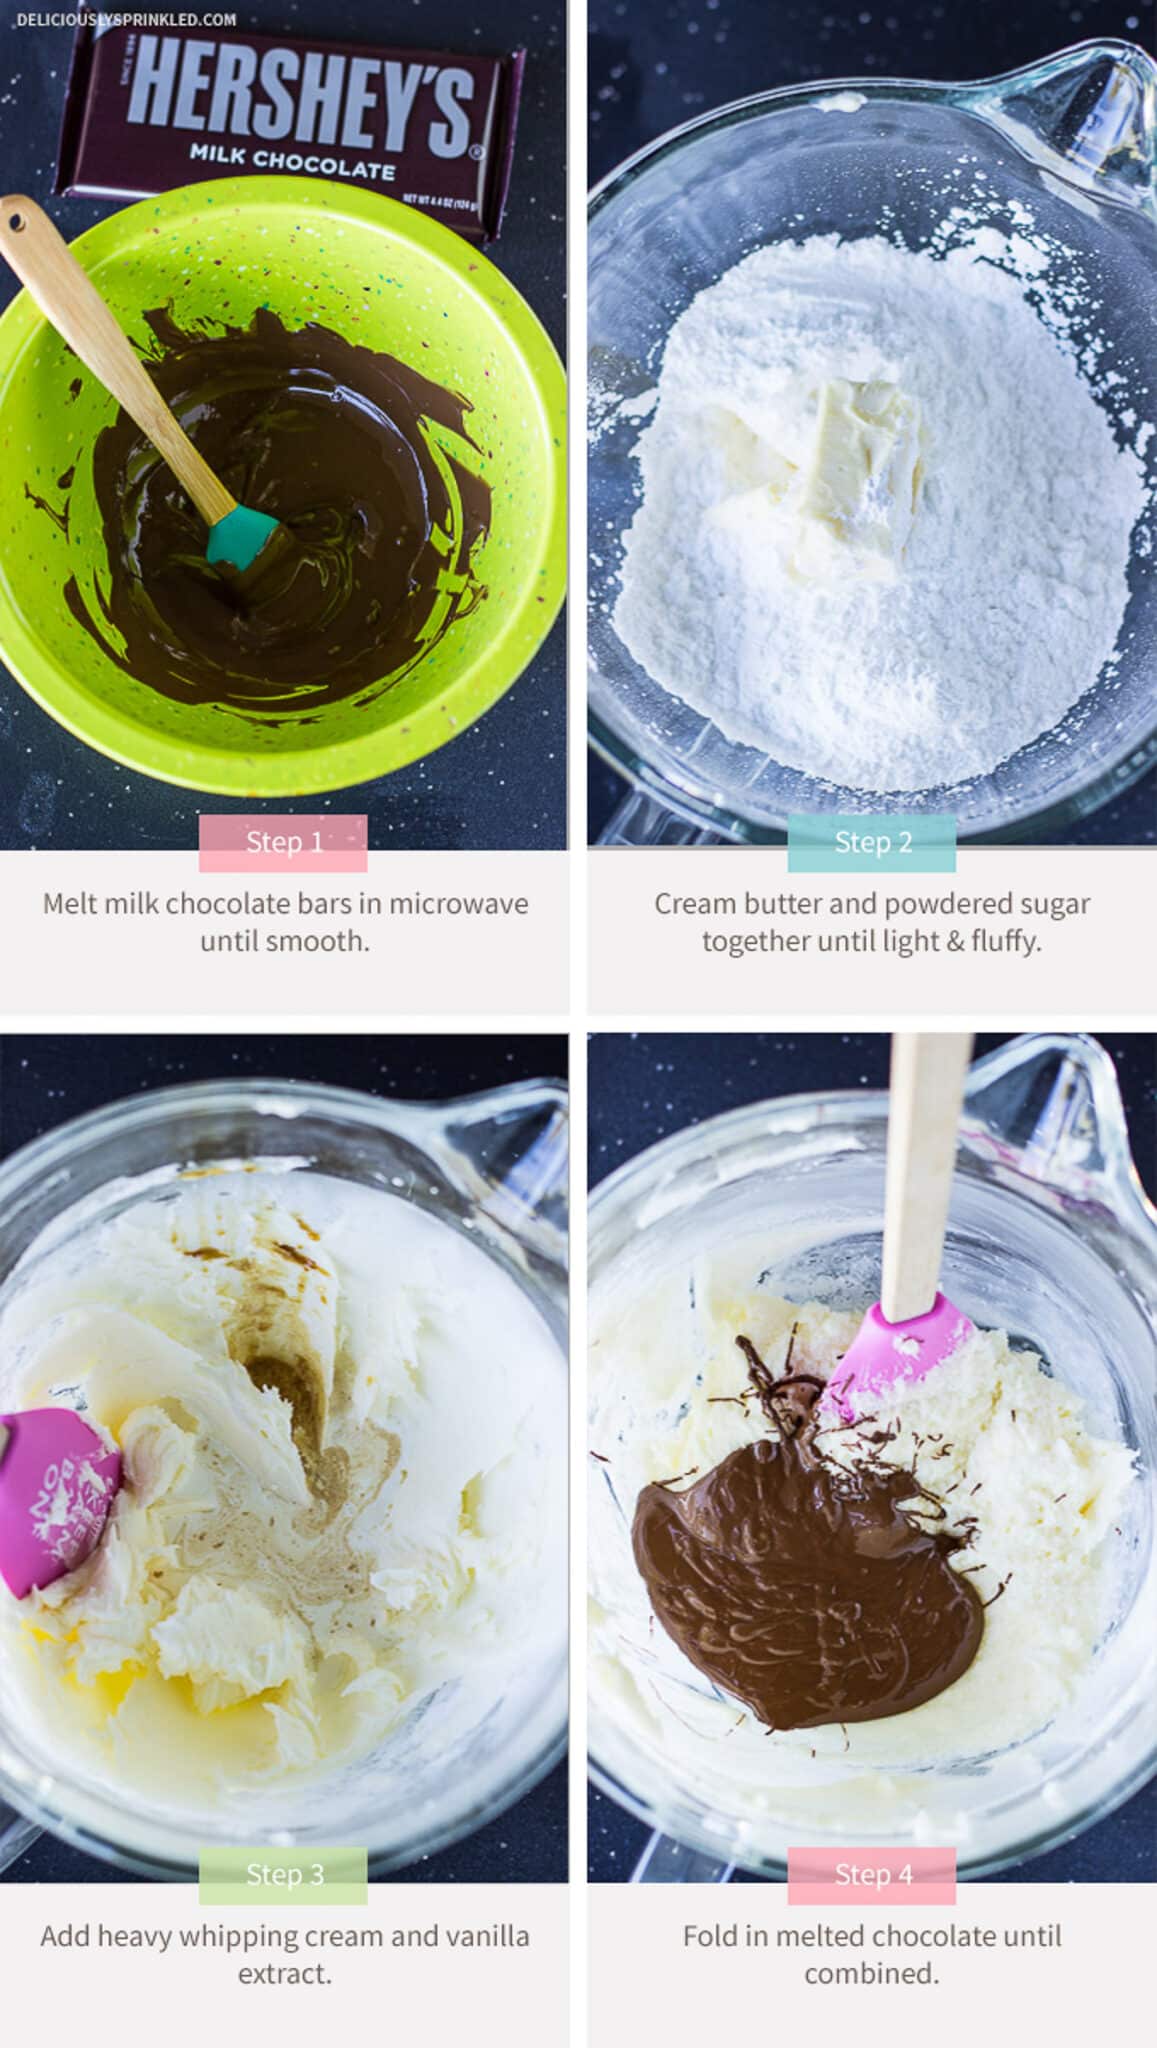 A collage of images showing how to make chocolate frosting from melting the chocolate, beating the butter and sugar, and mixing the rest of everything together.